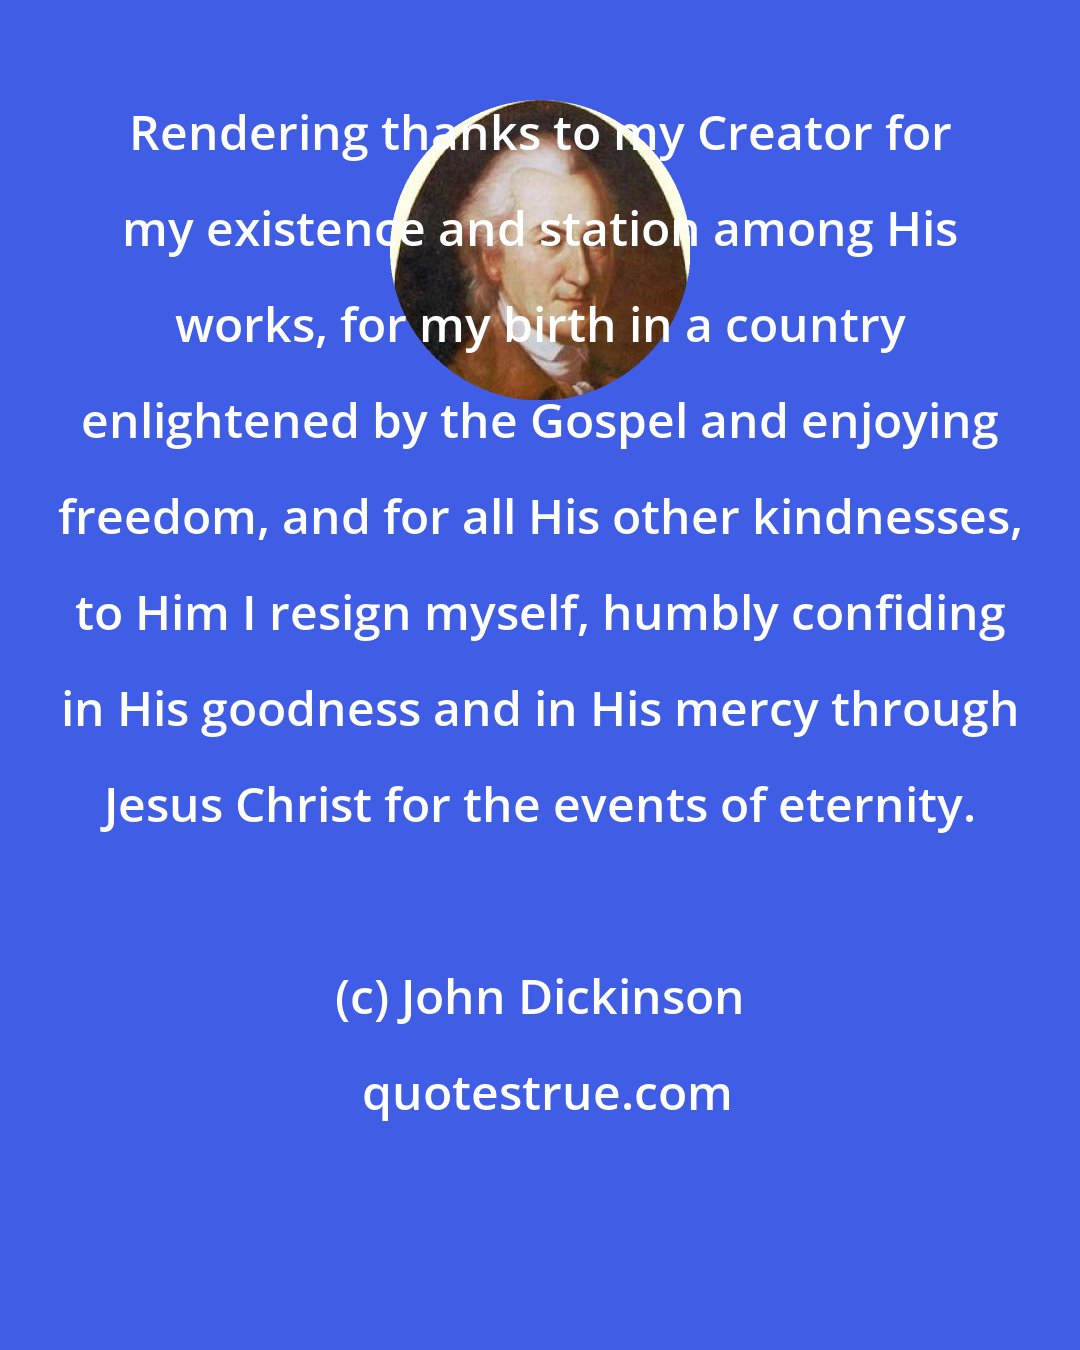 John Dickinson: Rendering thanks to my Creator for my existence and station among His works, for my birth in a country enlightened by the Gospel and enjoying freedom, and for all His other kindnesses, to Him I resign myself, humbly confiding in His goodness and in His mercy through Jesus Christ for the events of eternity.